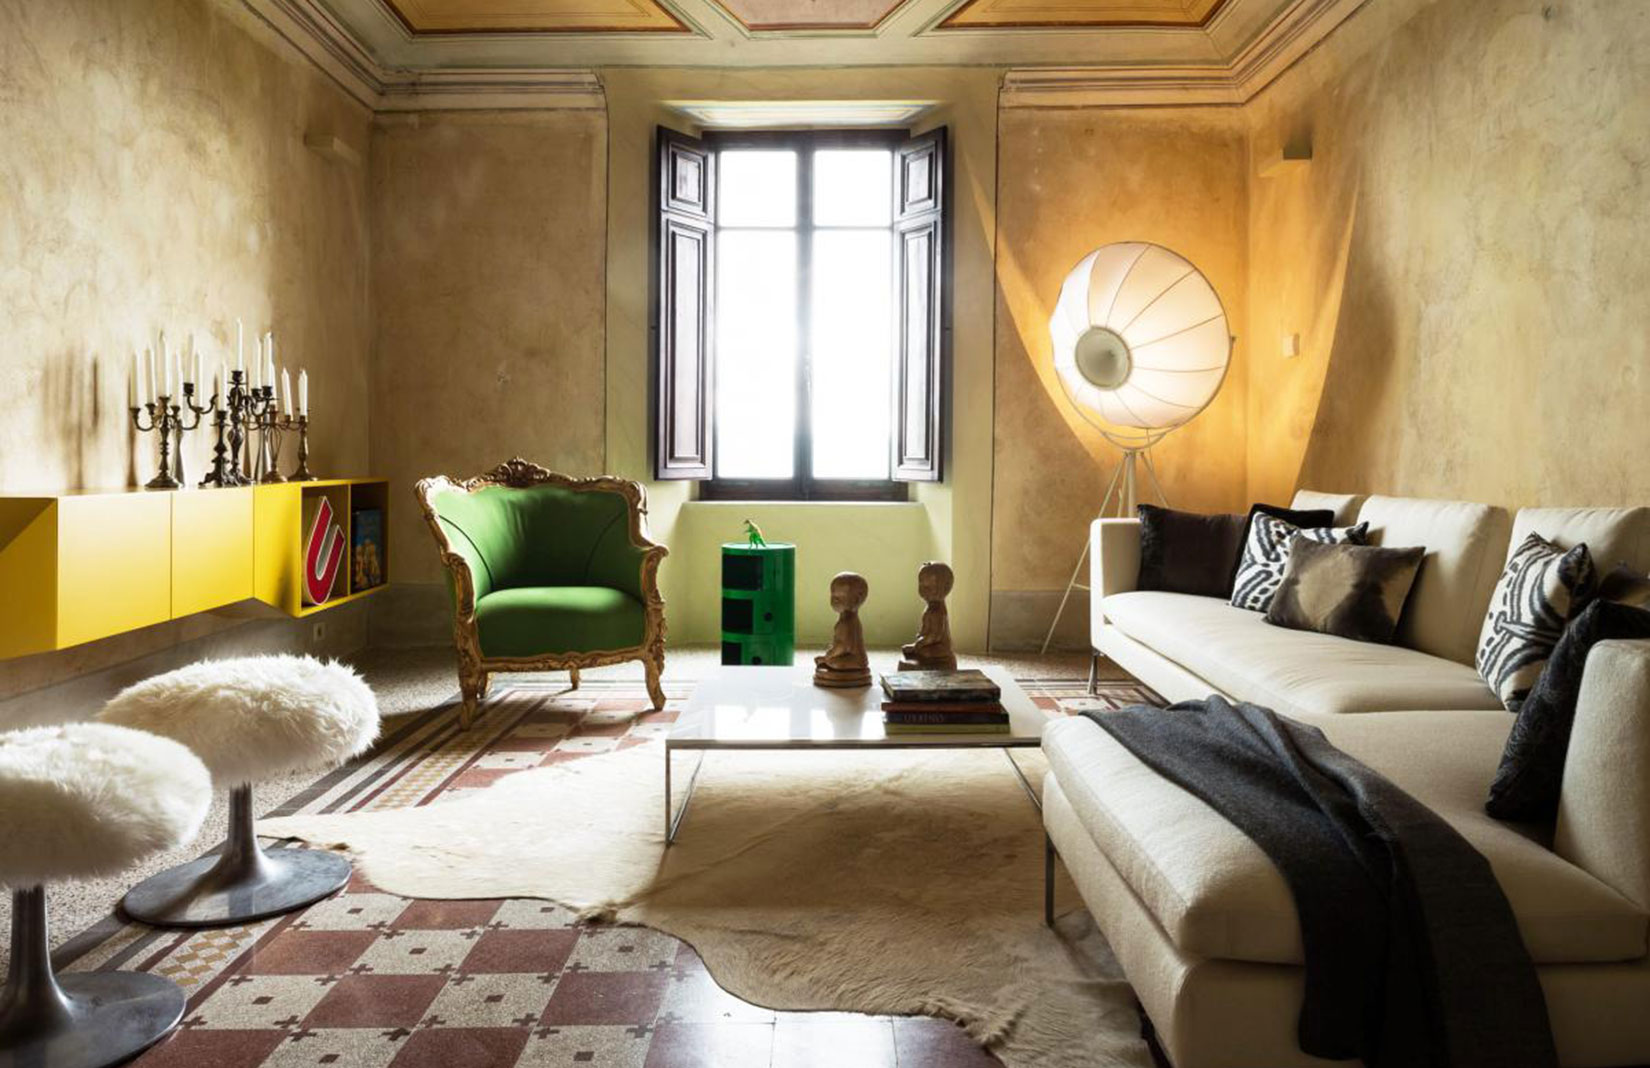 Rental Of The Week A Medieval Umbrian Apartment With A Modern Twist